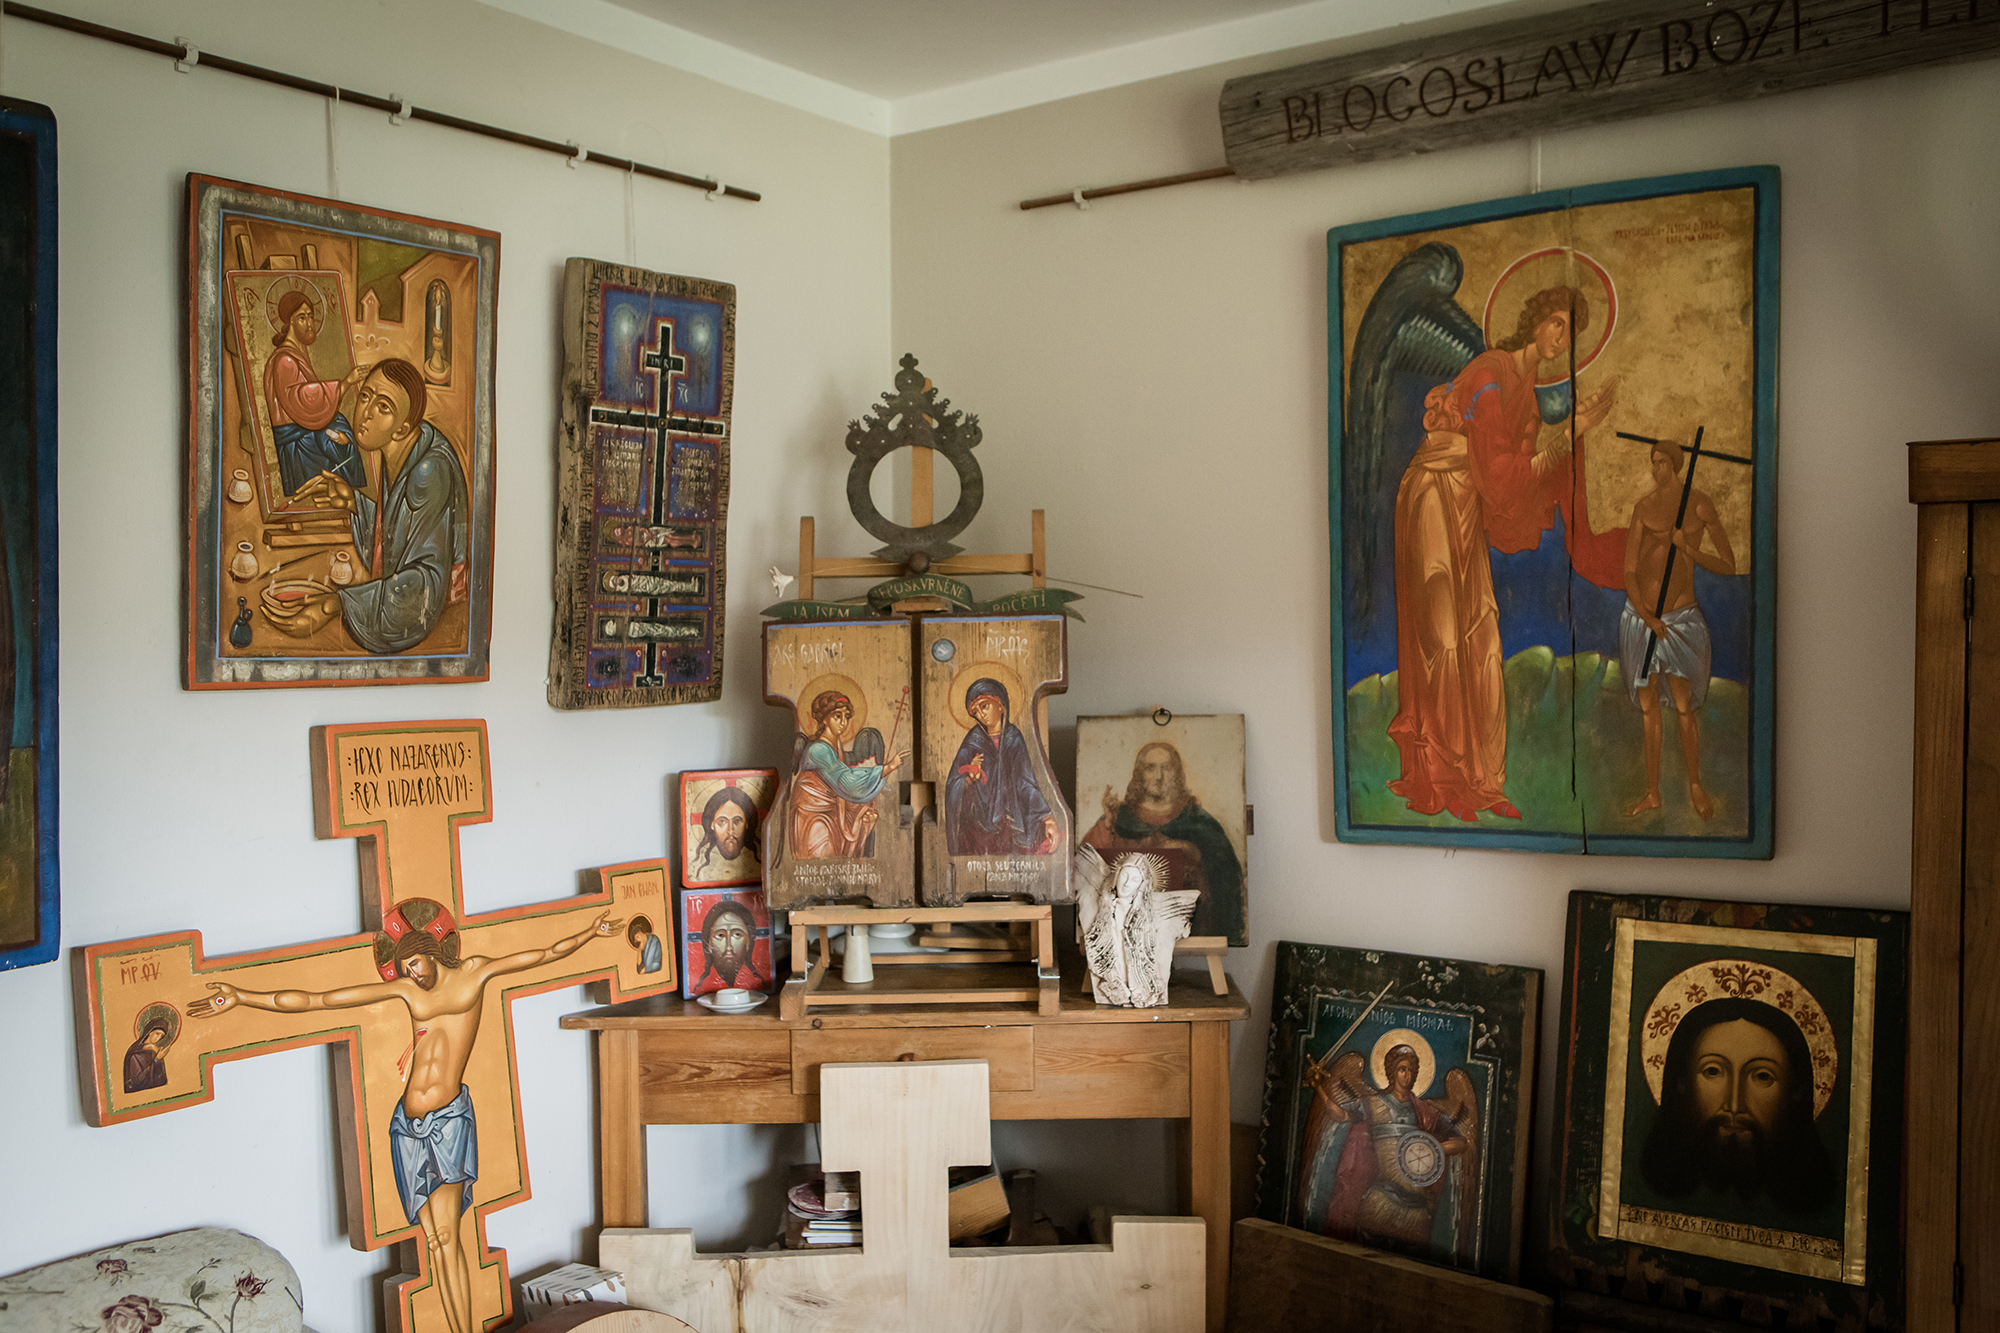 Icons written by Robert. In the center, on the easel, the Annunciation diptych.